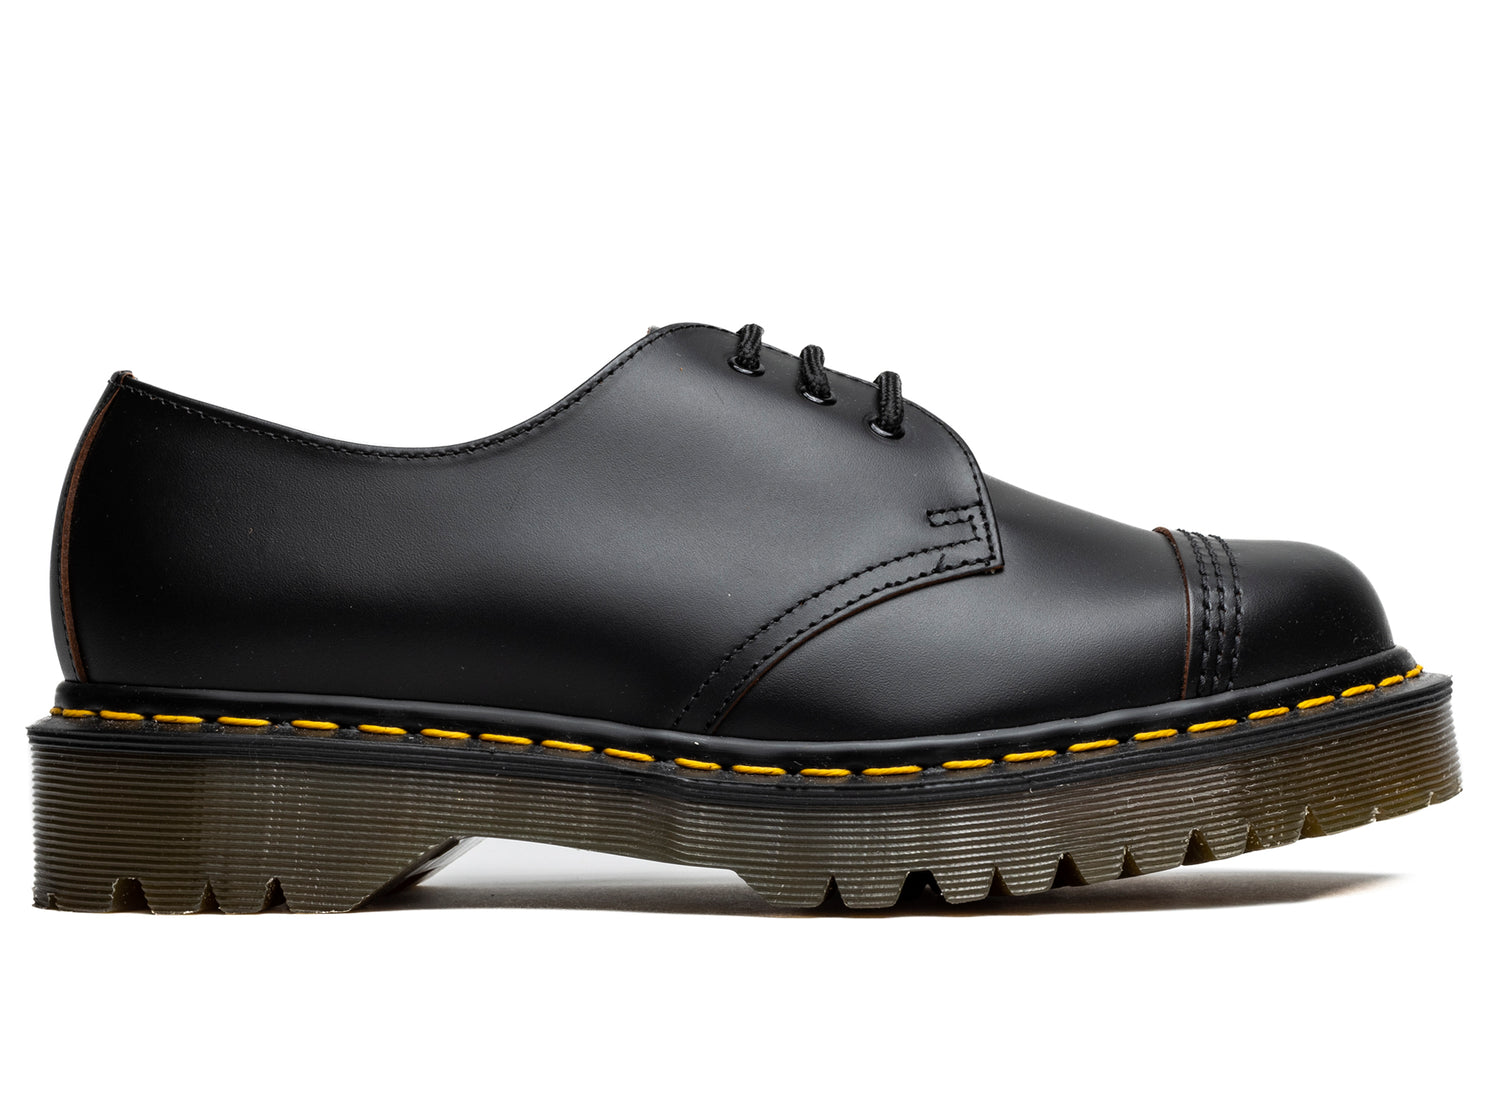 Dr. Martens 1461 Bex Made in England Toe Cap Boots – Oneness Boutique